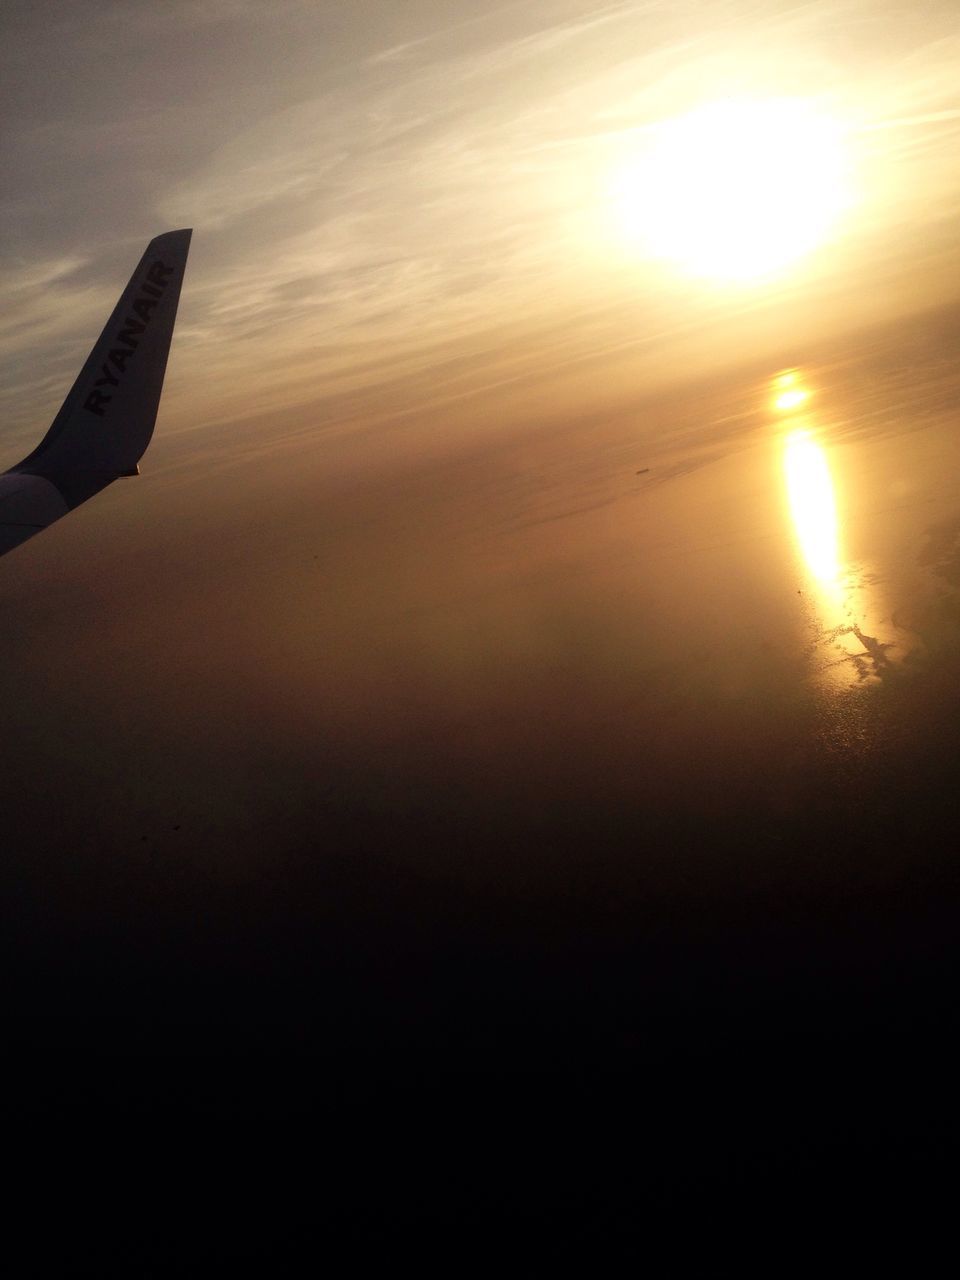 sunset, sun, airplane, aircraft wing, flying, sunlight, beauty in nature, sky, scenics, part of, nature, orange color, air vehicle, transportation, sea, tranquil scene, tranquility, aerial view, cropped, mode of transport